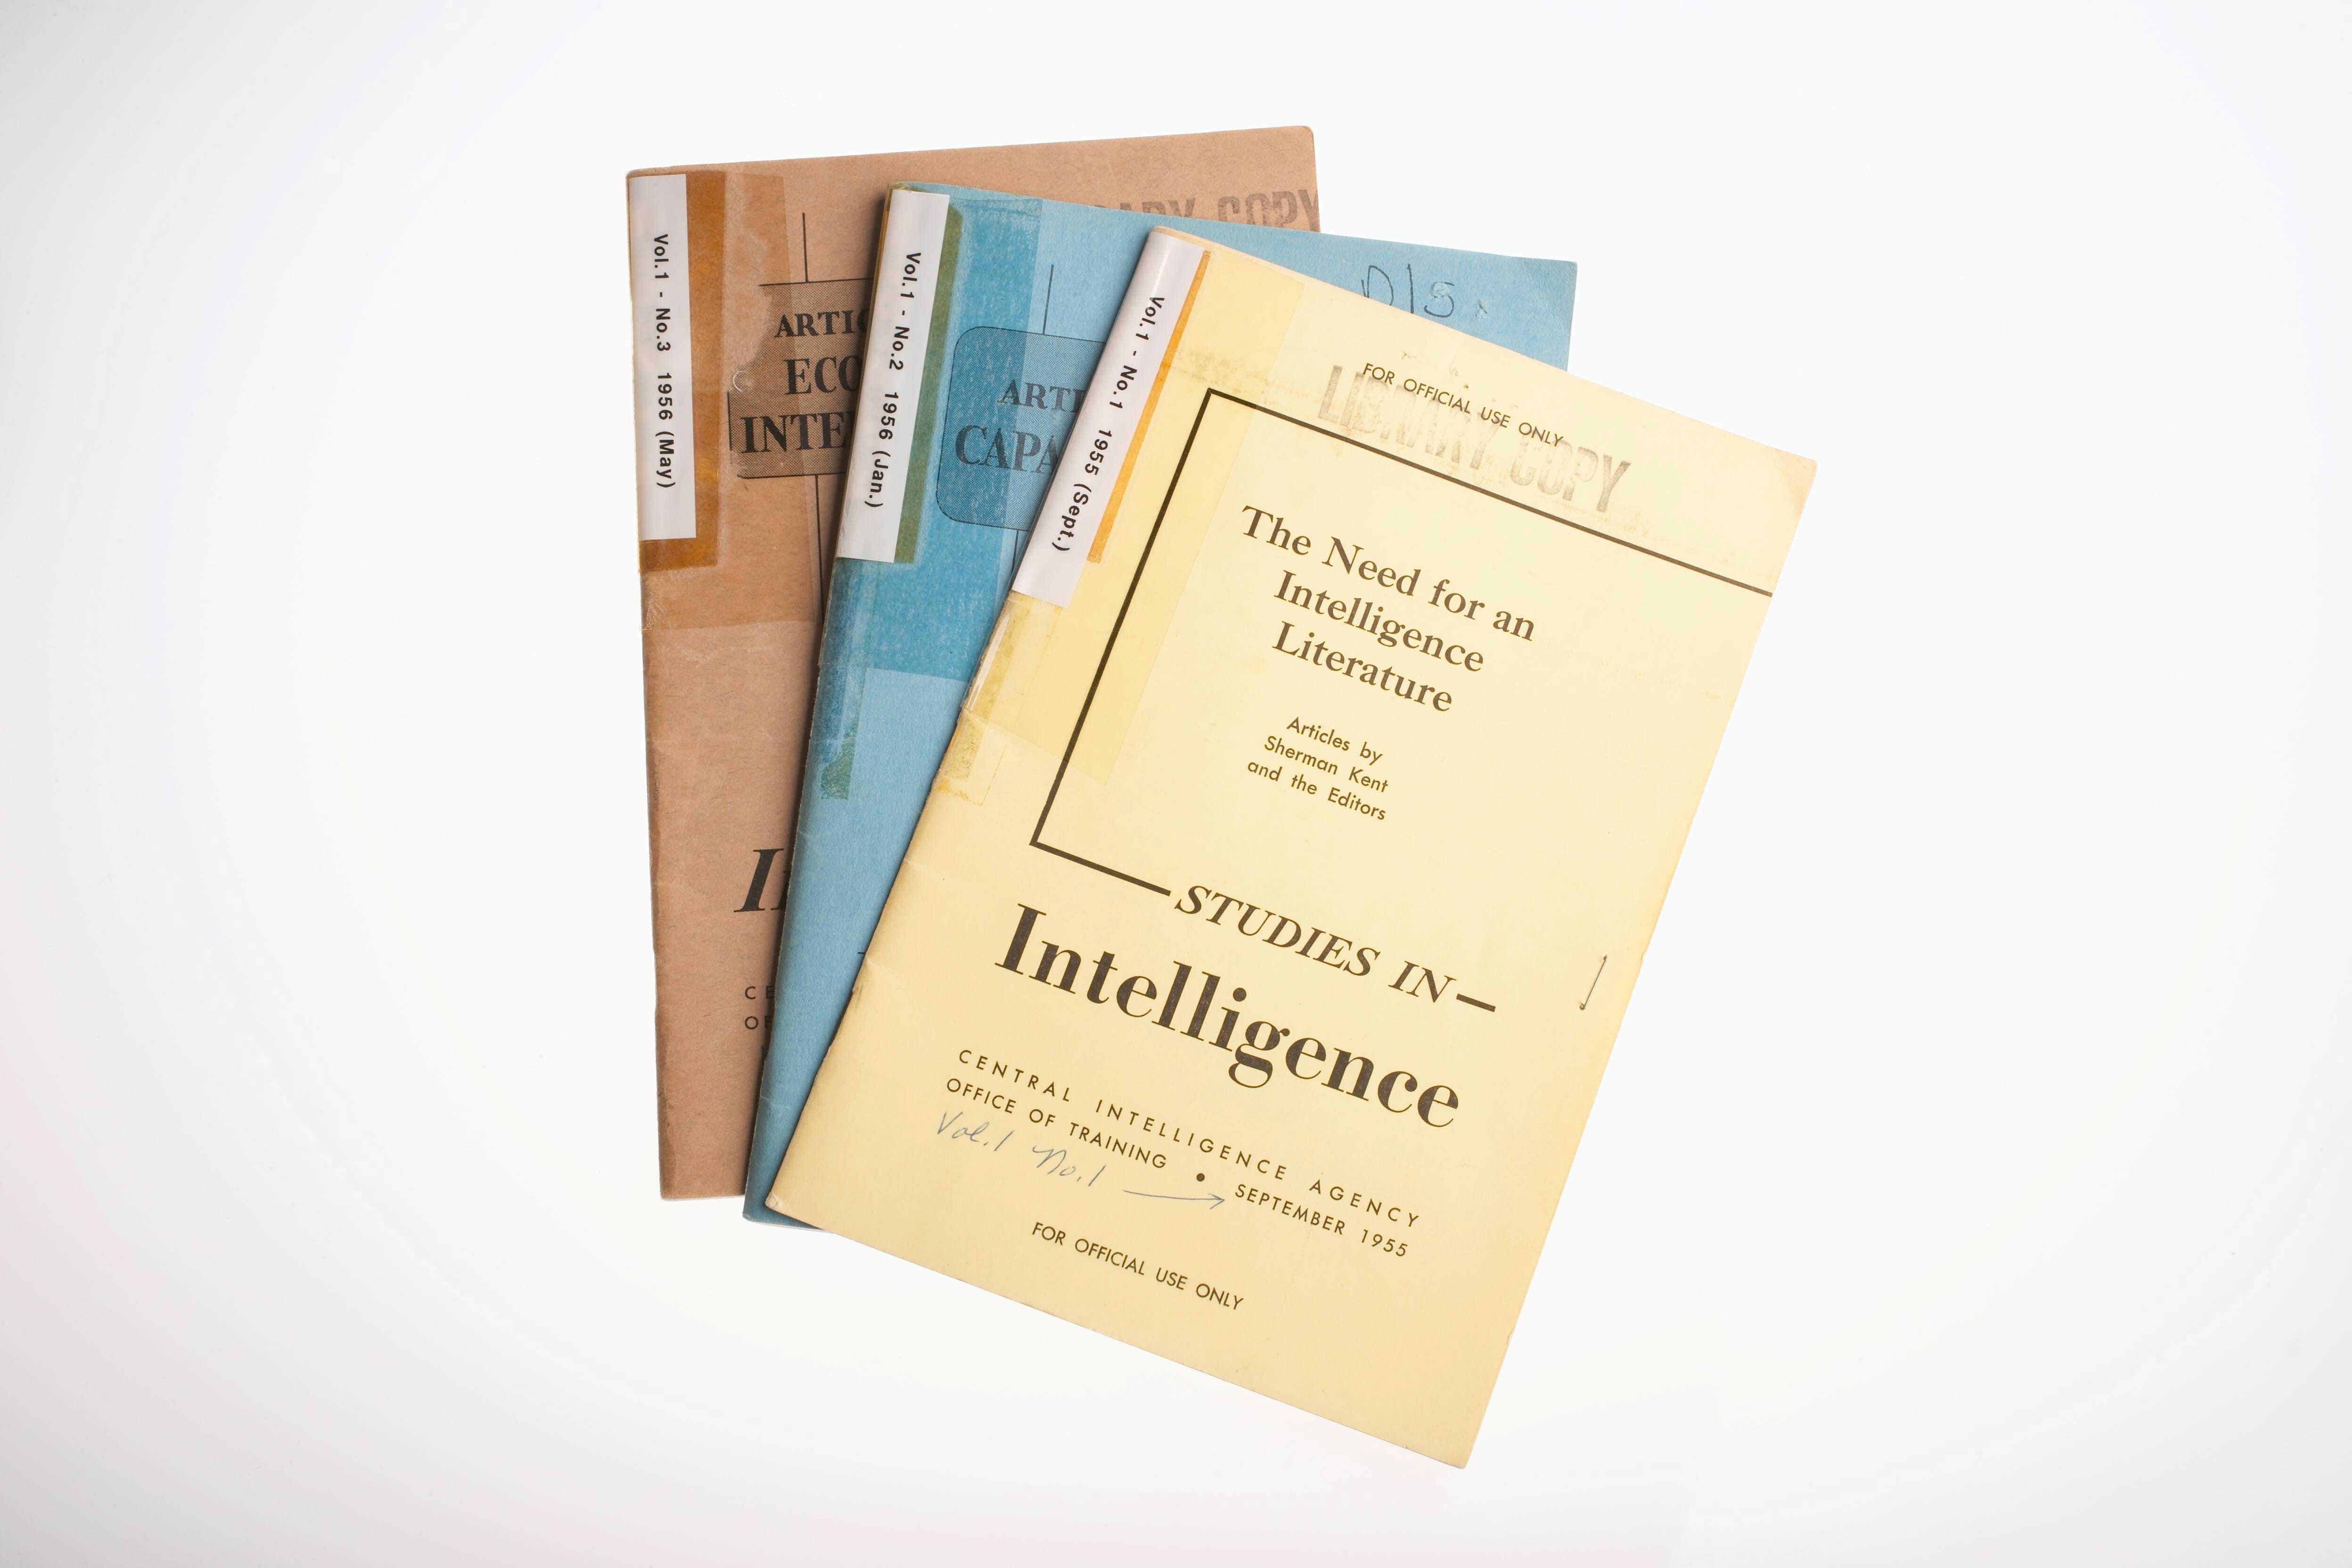 Three issues of Studies in Intelligence fanned out.